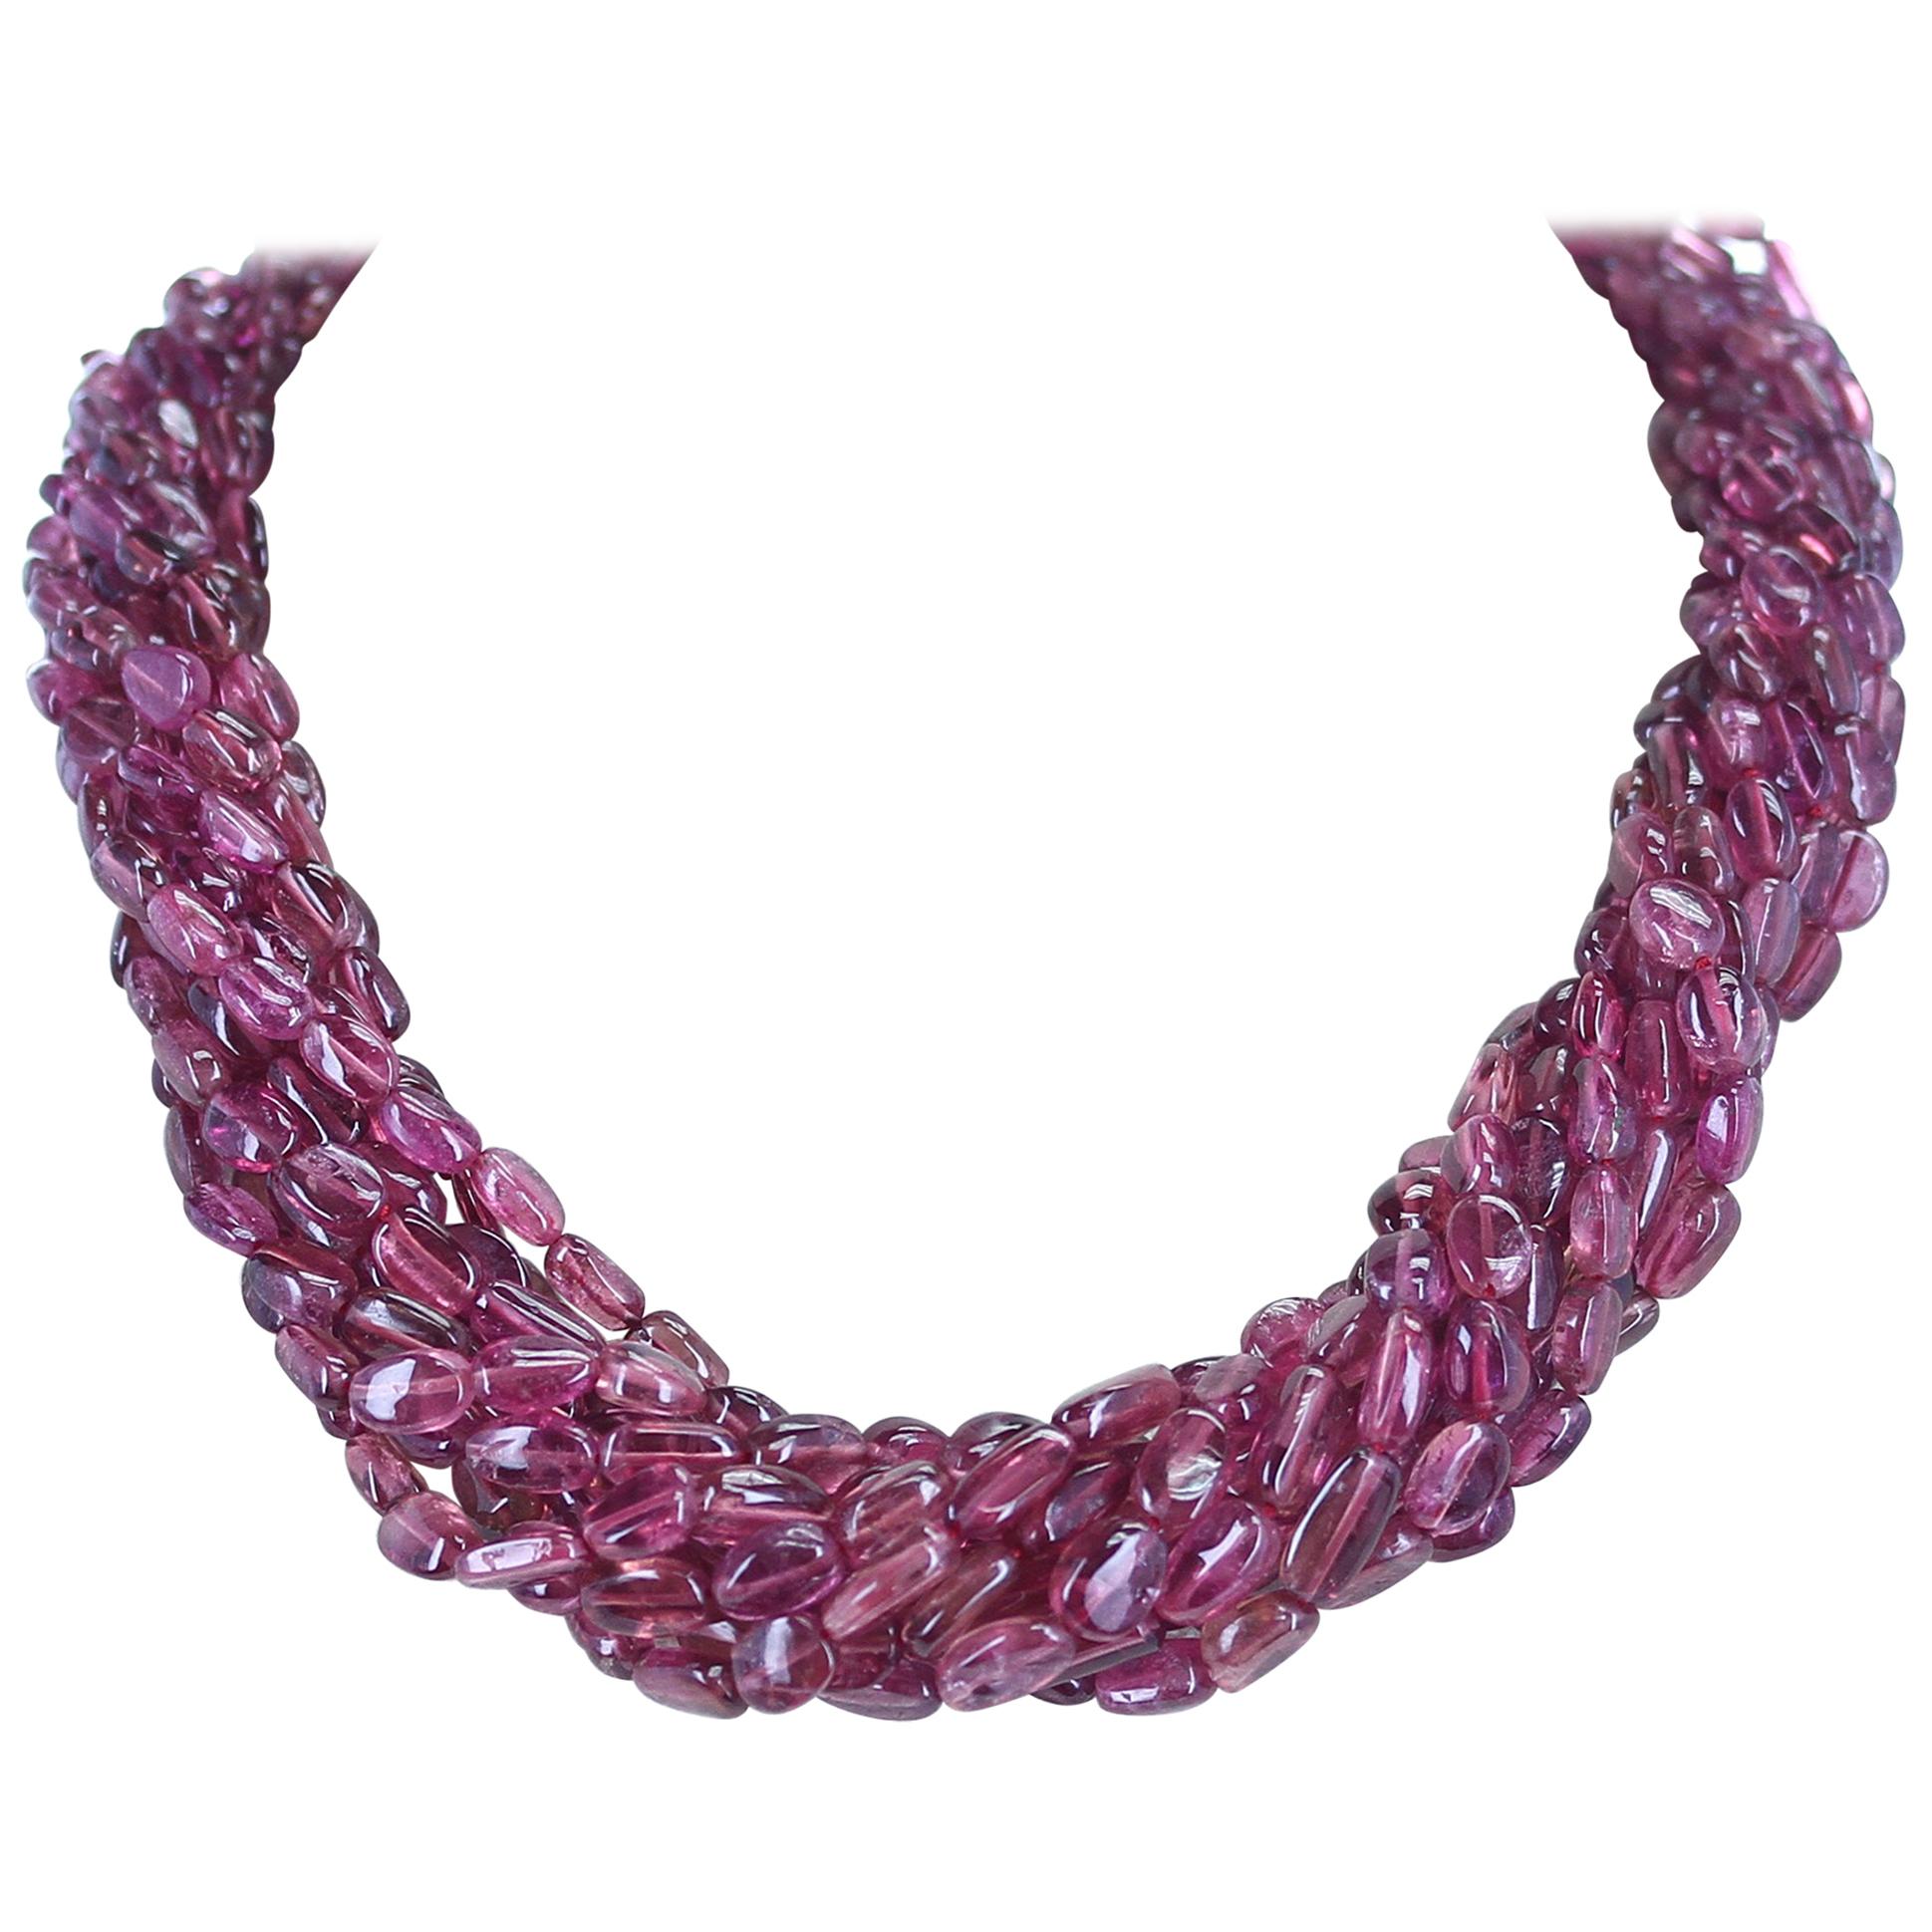 820 Carat Genuine and Natural Plain and Smooth Tourmaline Tumbled Beads Necklace